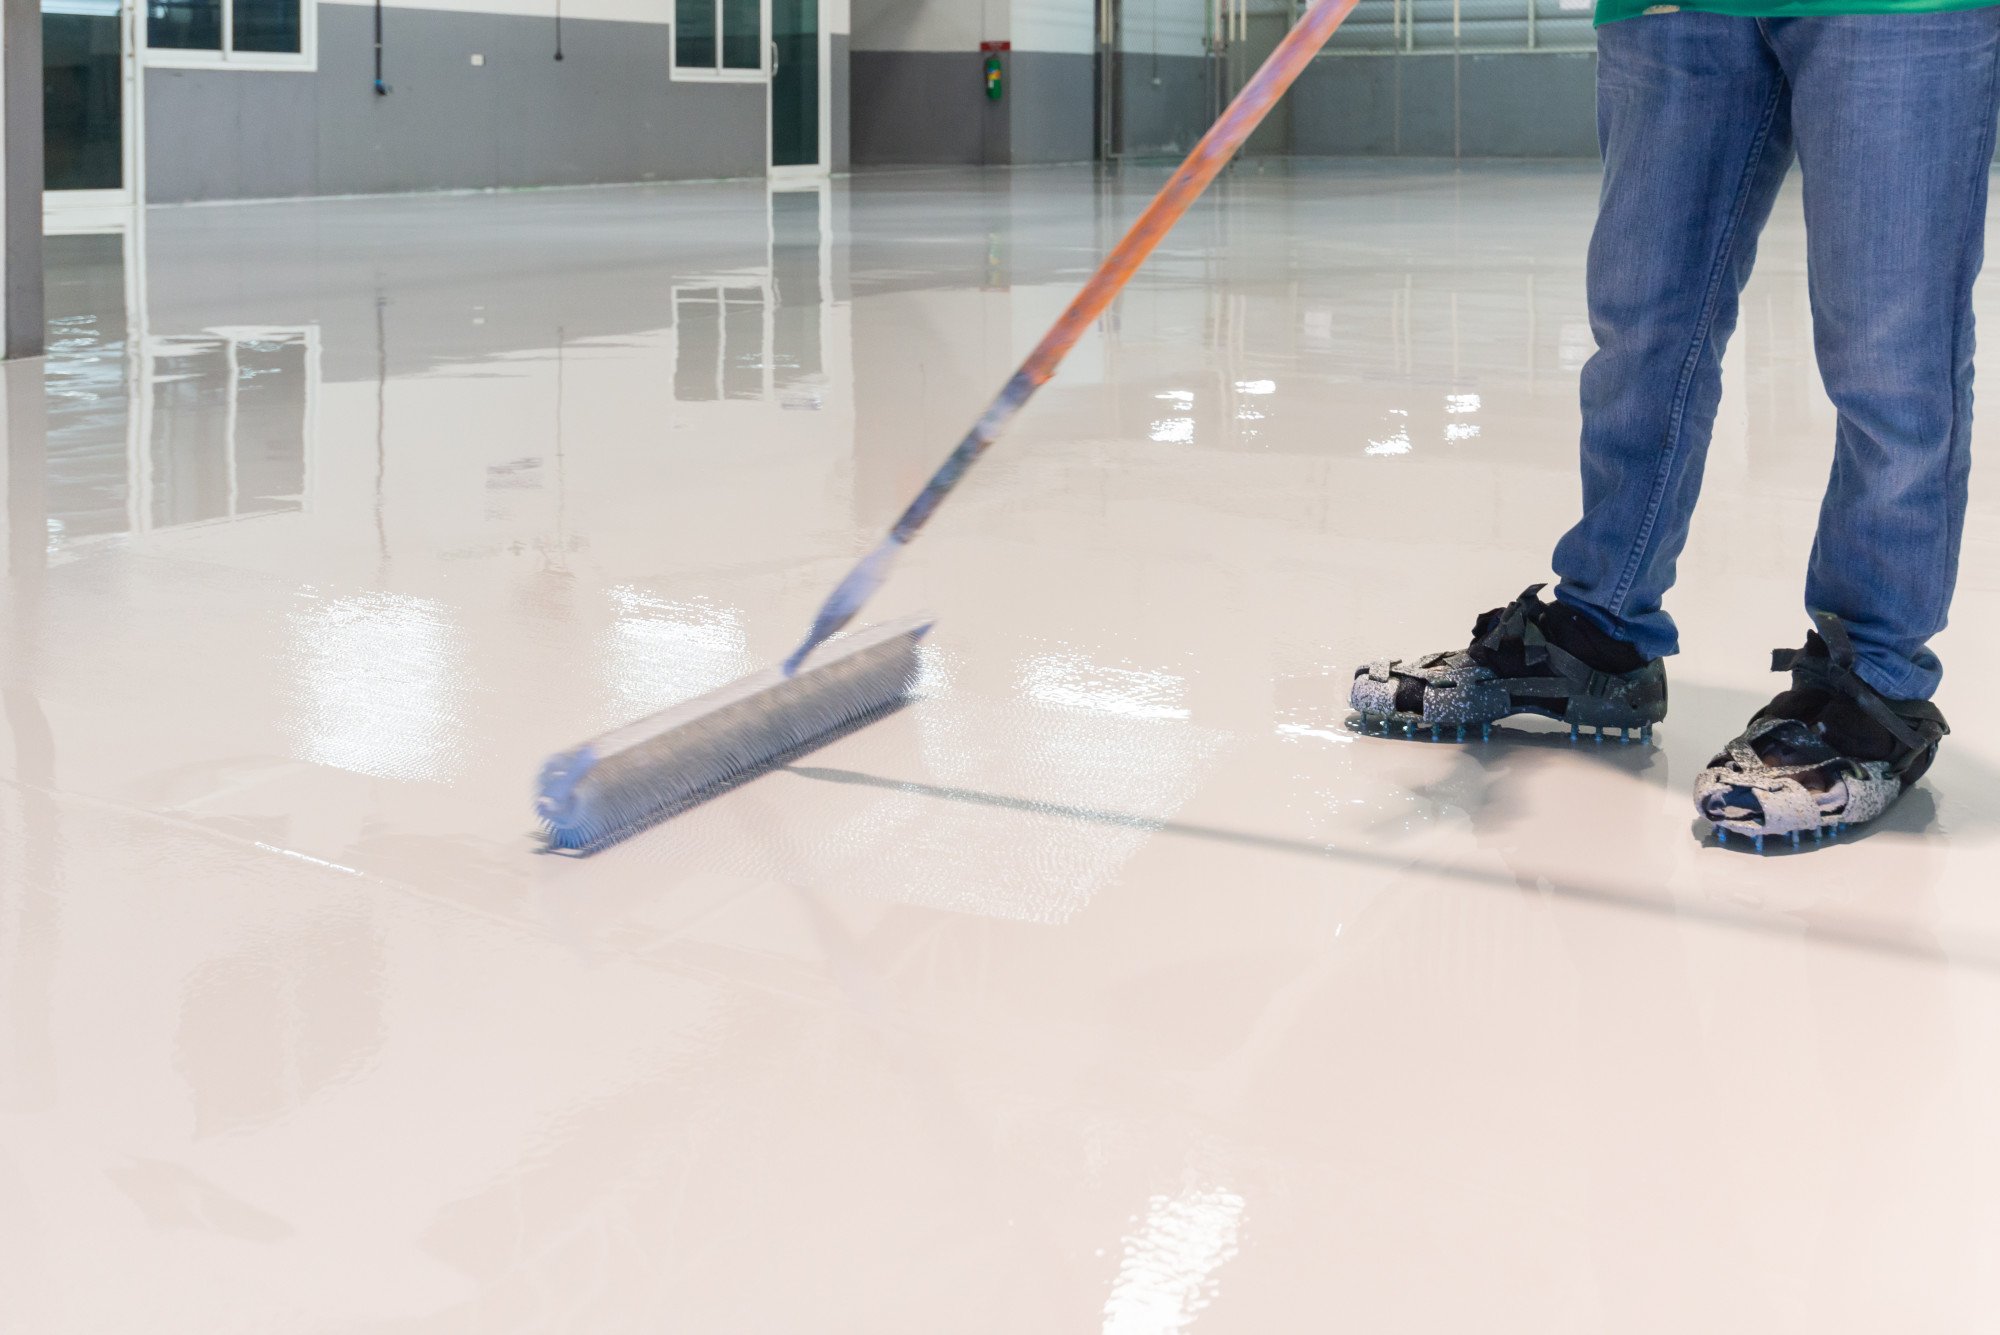 Are you wondering how to keep your garage floor in great shape? Click here for three helpful tips for maintaining your epoxy garage floor.